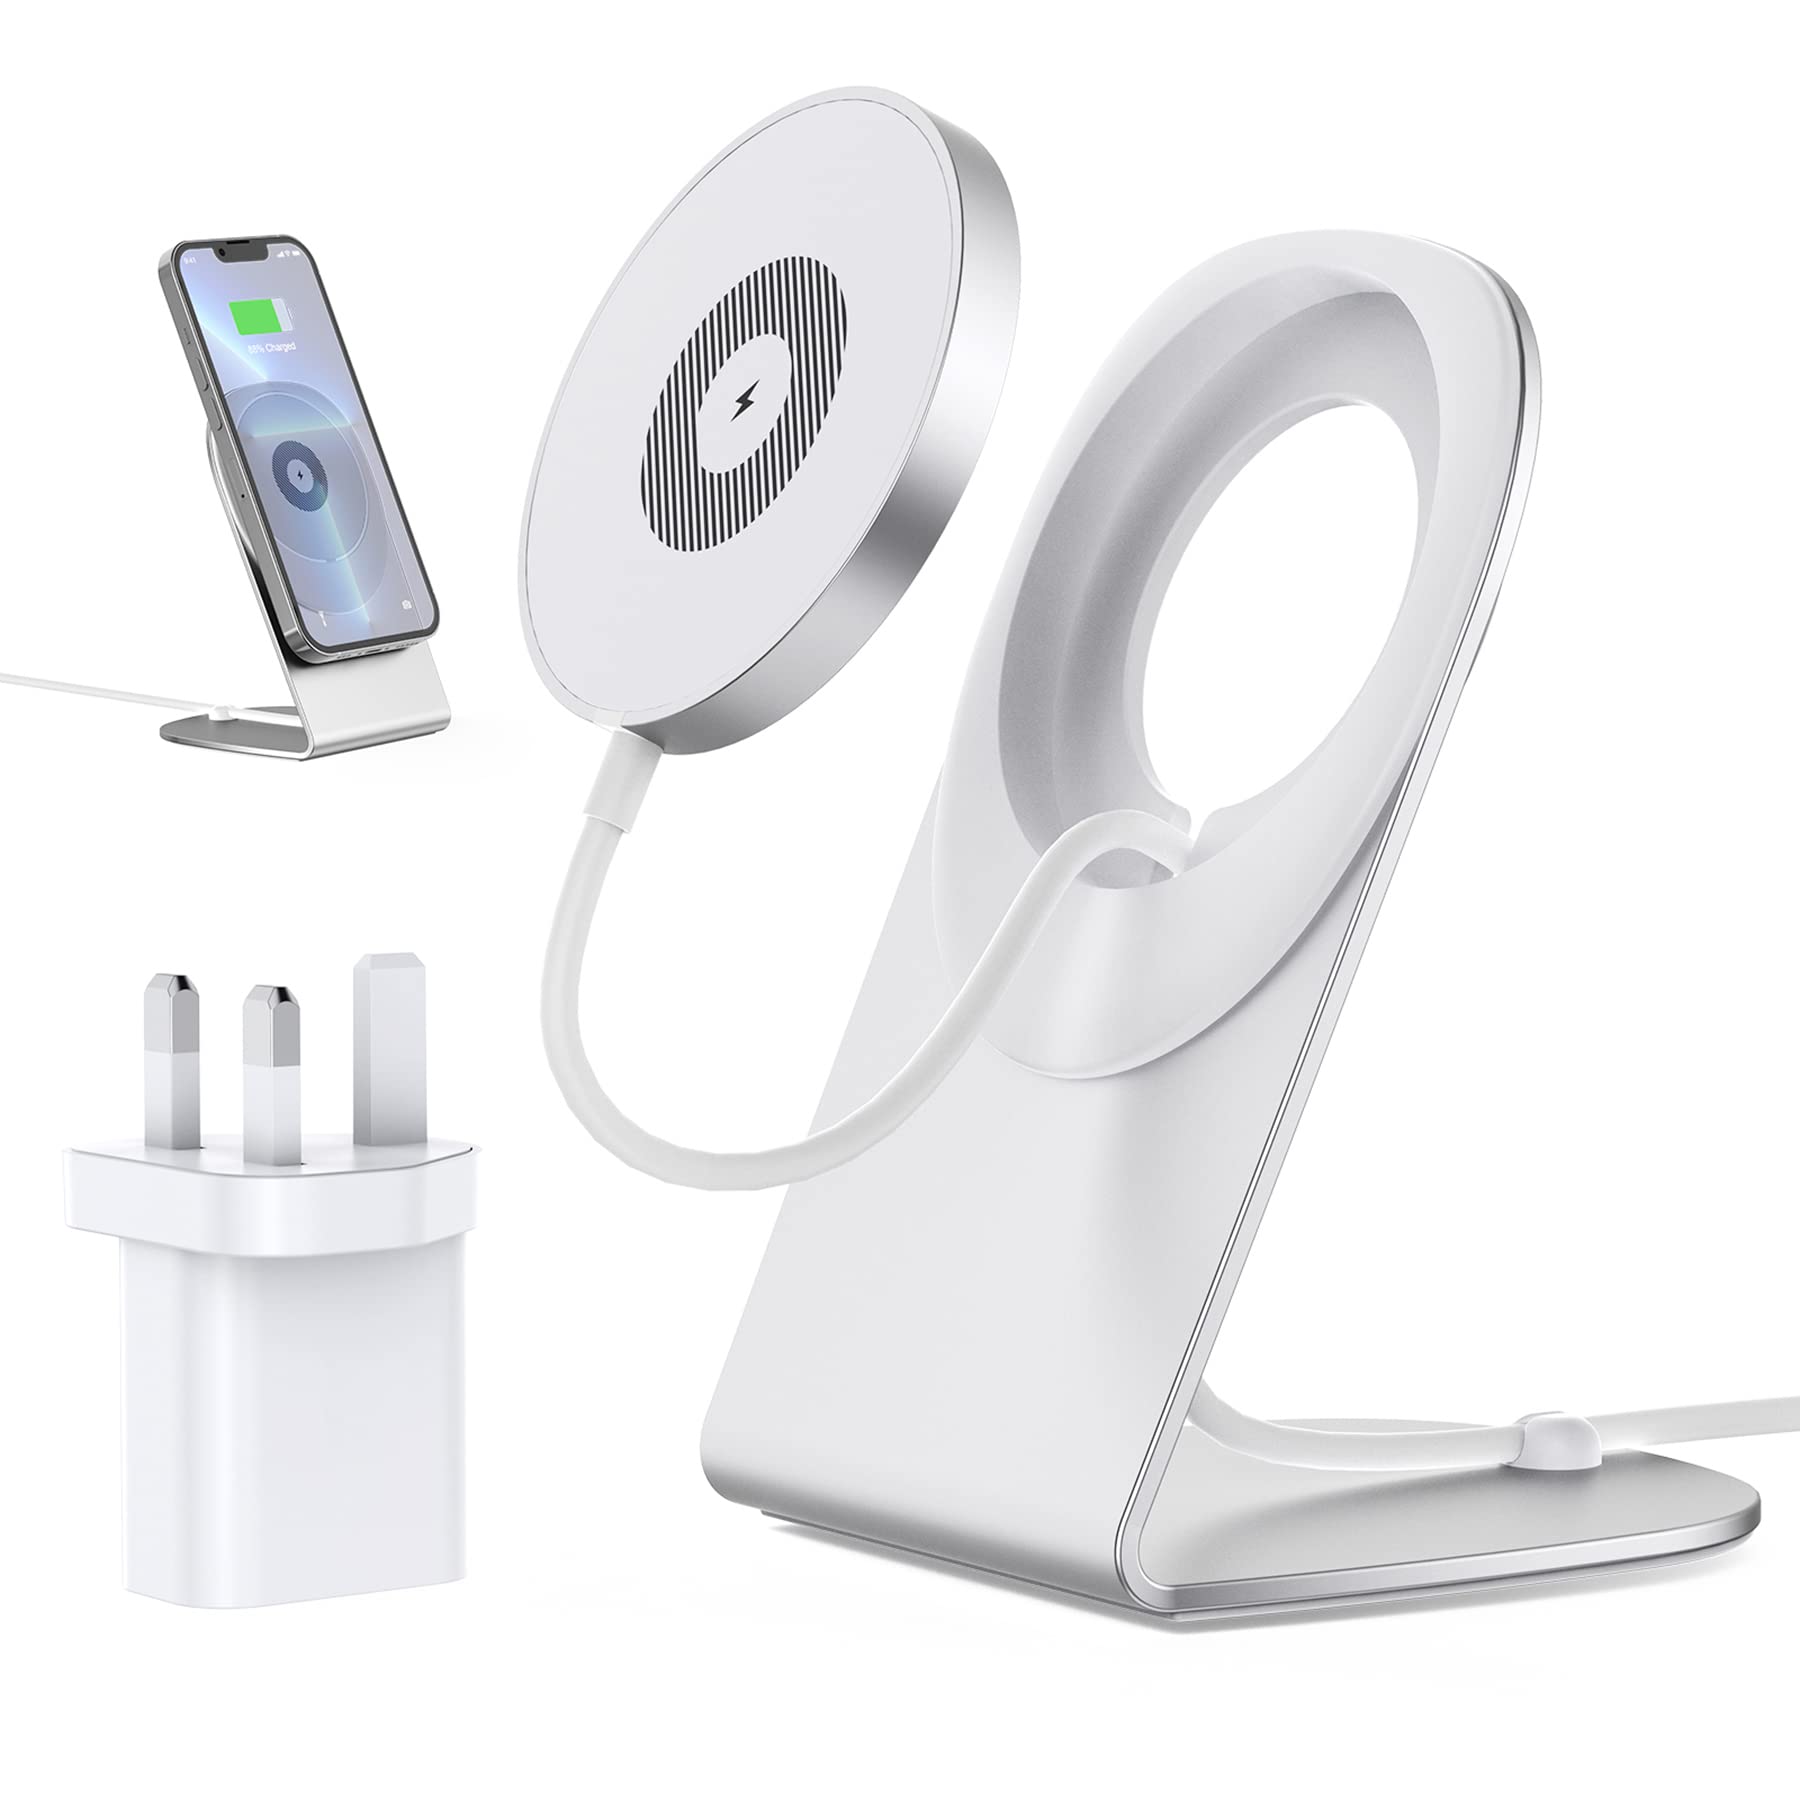 RoRoSkin Magnetic Wireless Charger - Convertible Fast Wireless Charging Stand/Pad with 5ft USB-C Cable Compatible with Mag safe iPhone 13 12 Pro Max Mini,Airpods 3 (with 20W Charger)